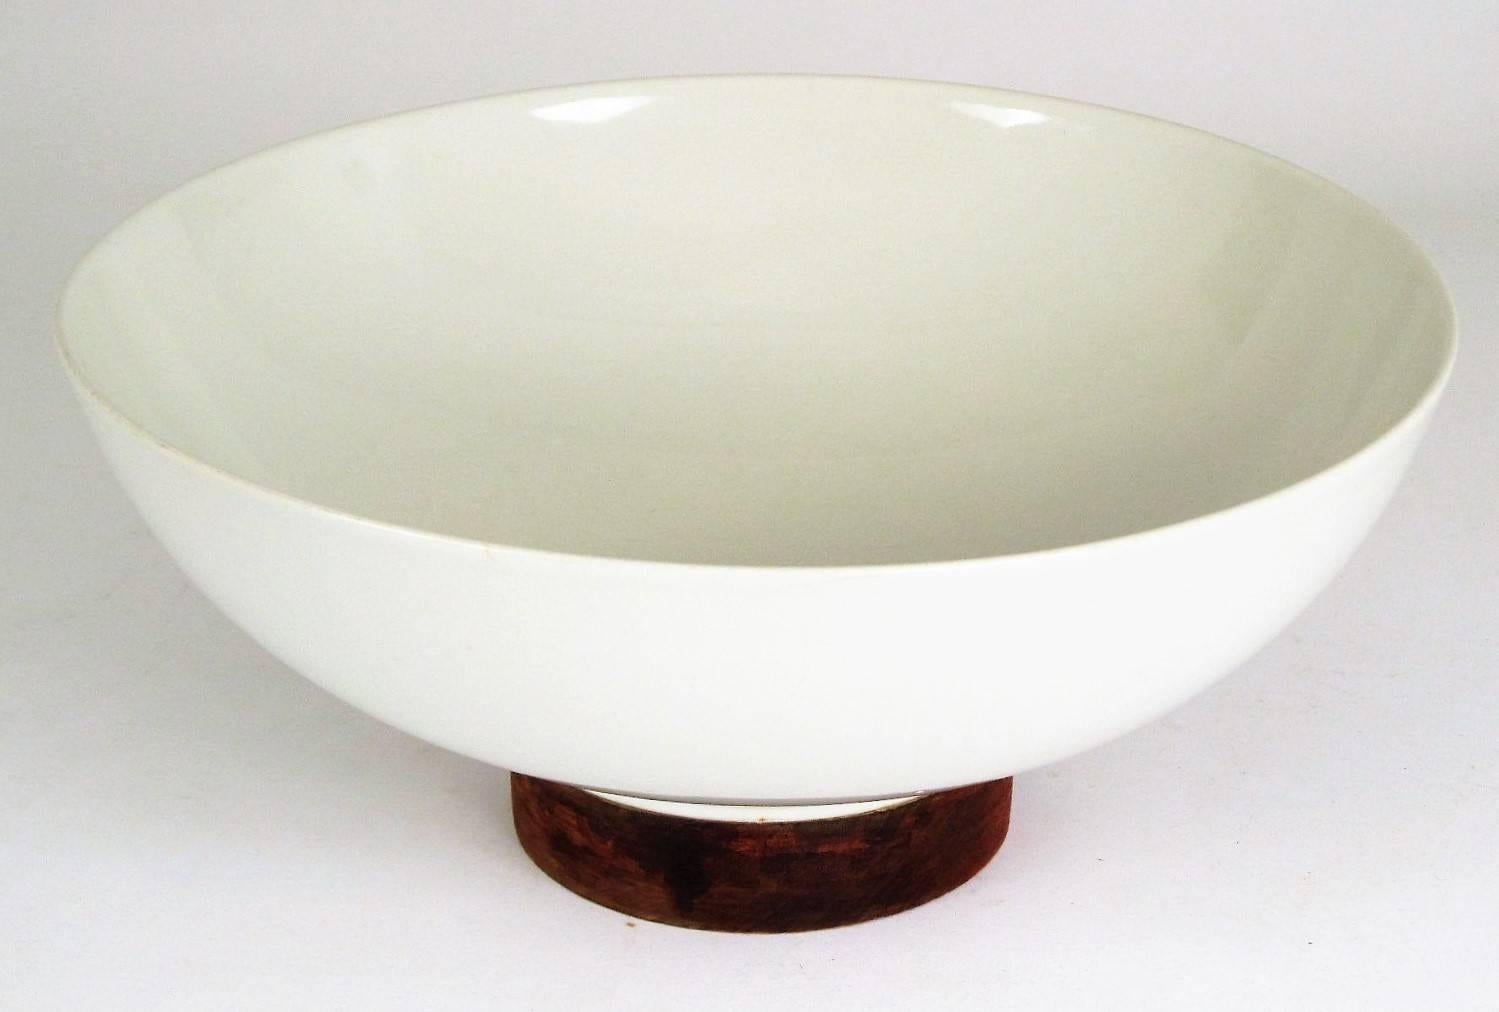 Designed in 1955 for Raymor and manufactured by Hyalin ceramics company. Each piece is white porcelain with walnut accents. All are in excellent condition with the exception of the large salad bowl which has some minor crazing to the interior. The